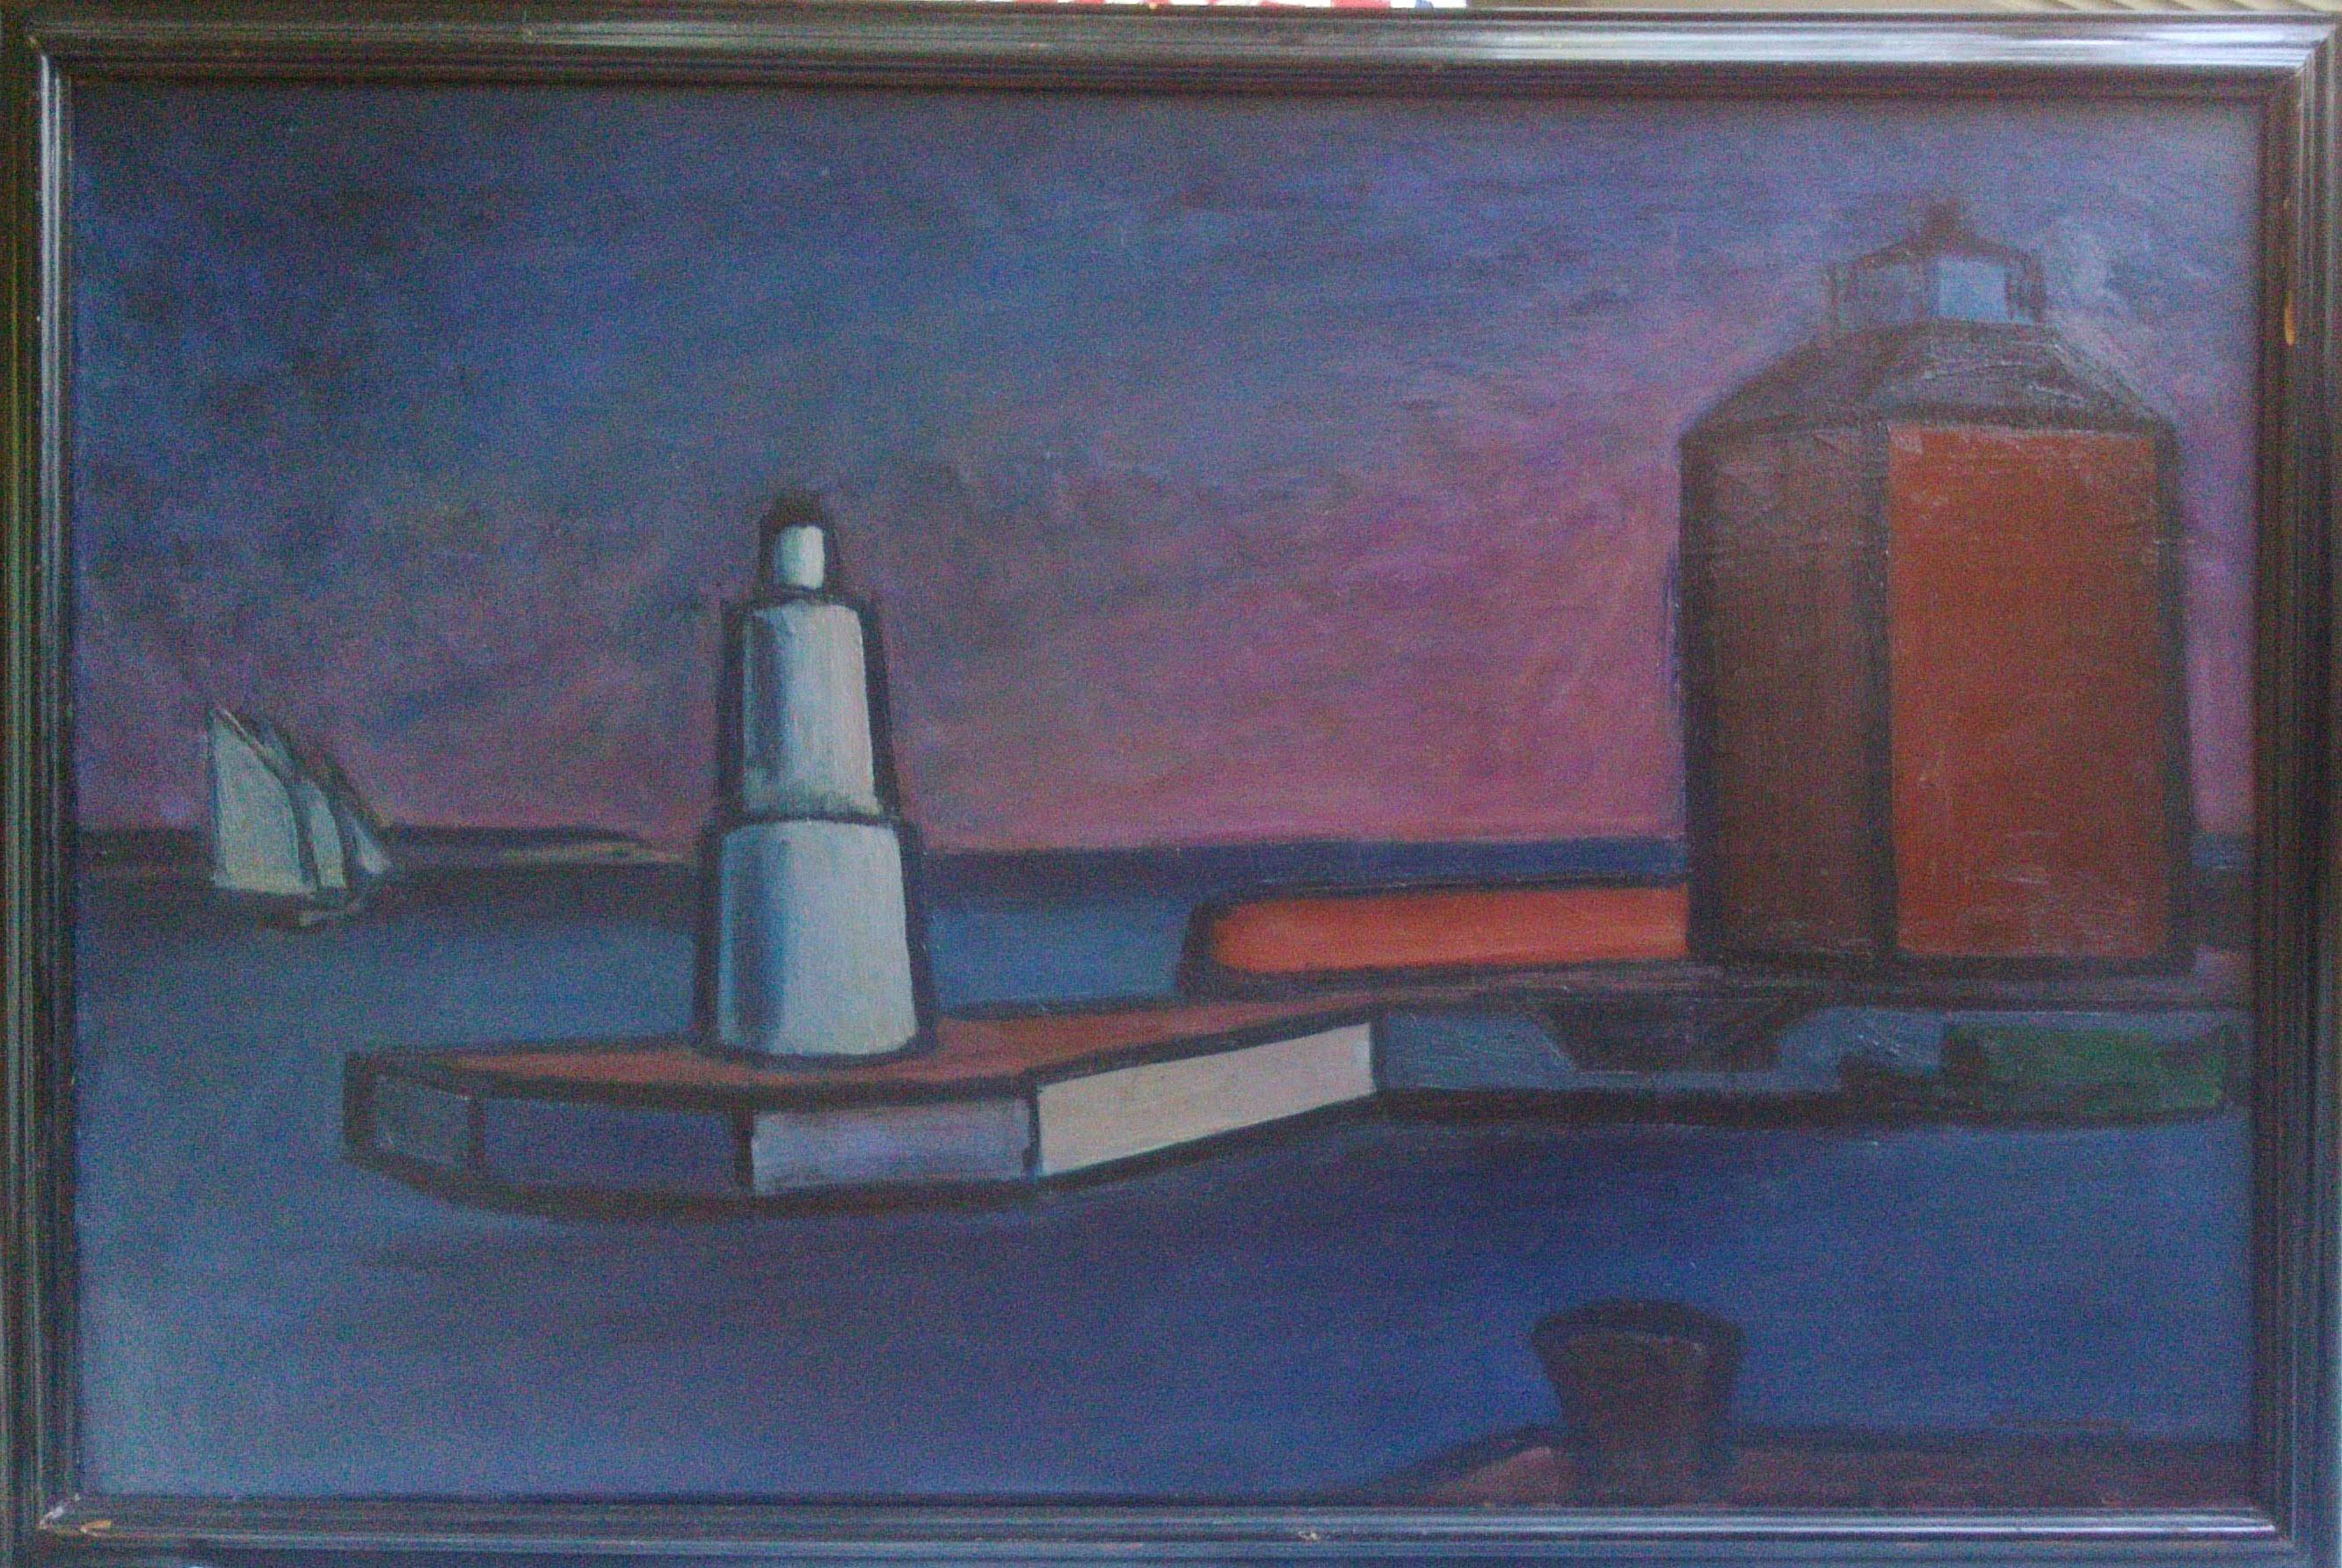 Scandinavian Modernist: Lighthouse at Helsingor. Exhibited at Venice Biennale  - Painting by William Lonnberg